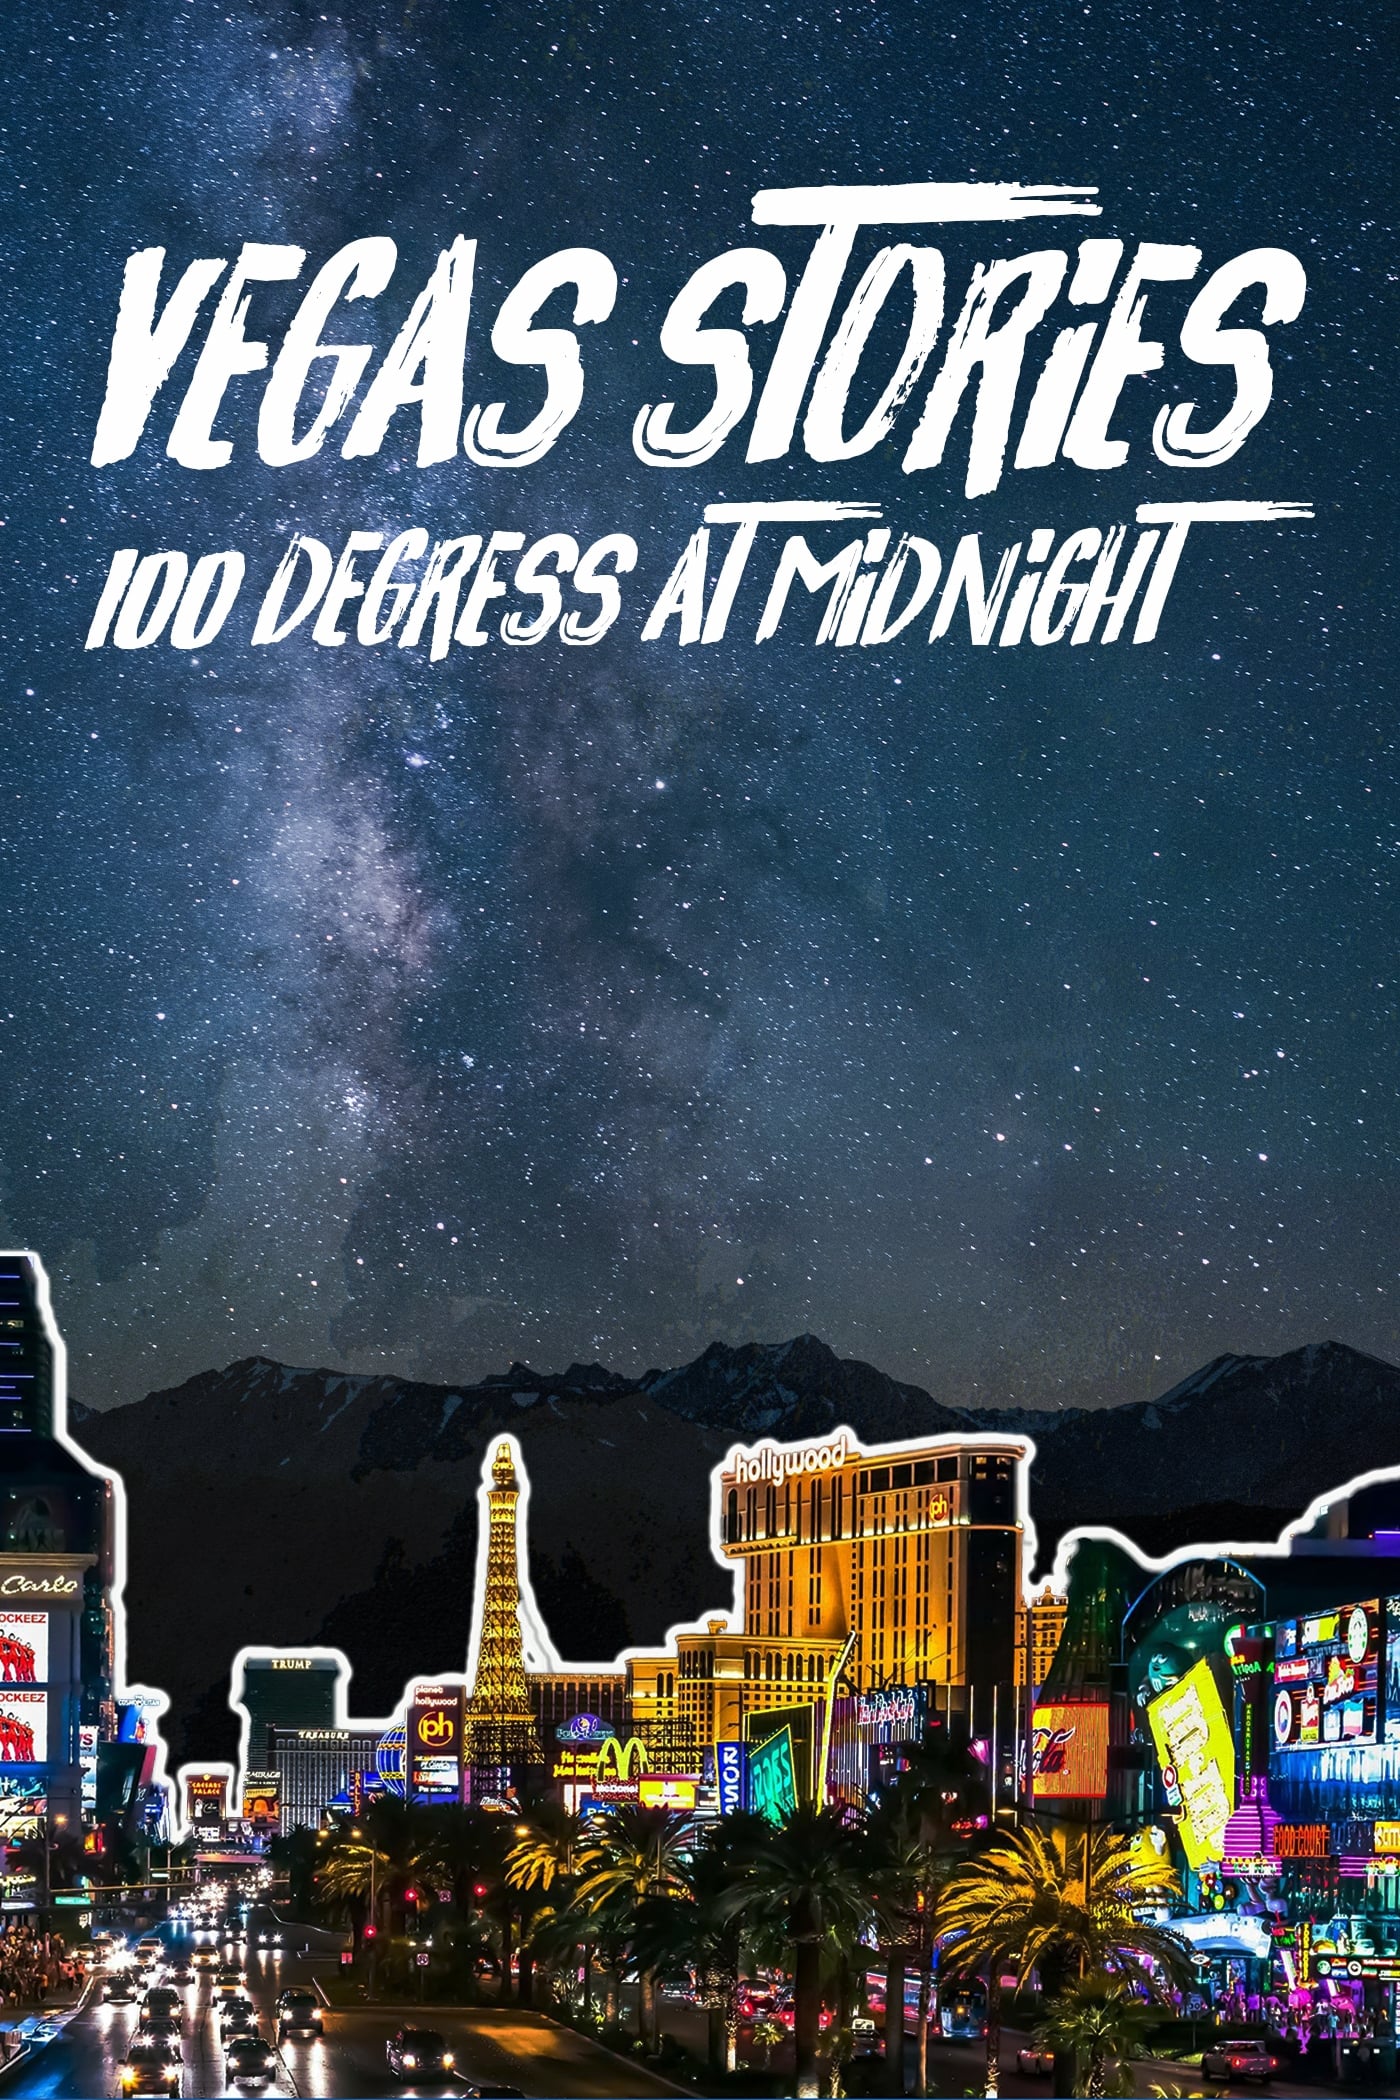 Vegas Stories: 100 Degrees at Midnight on FREECABLE TV